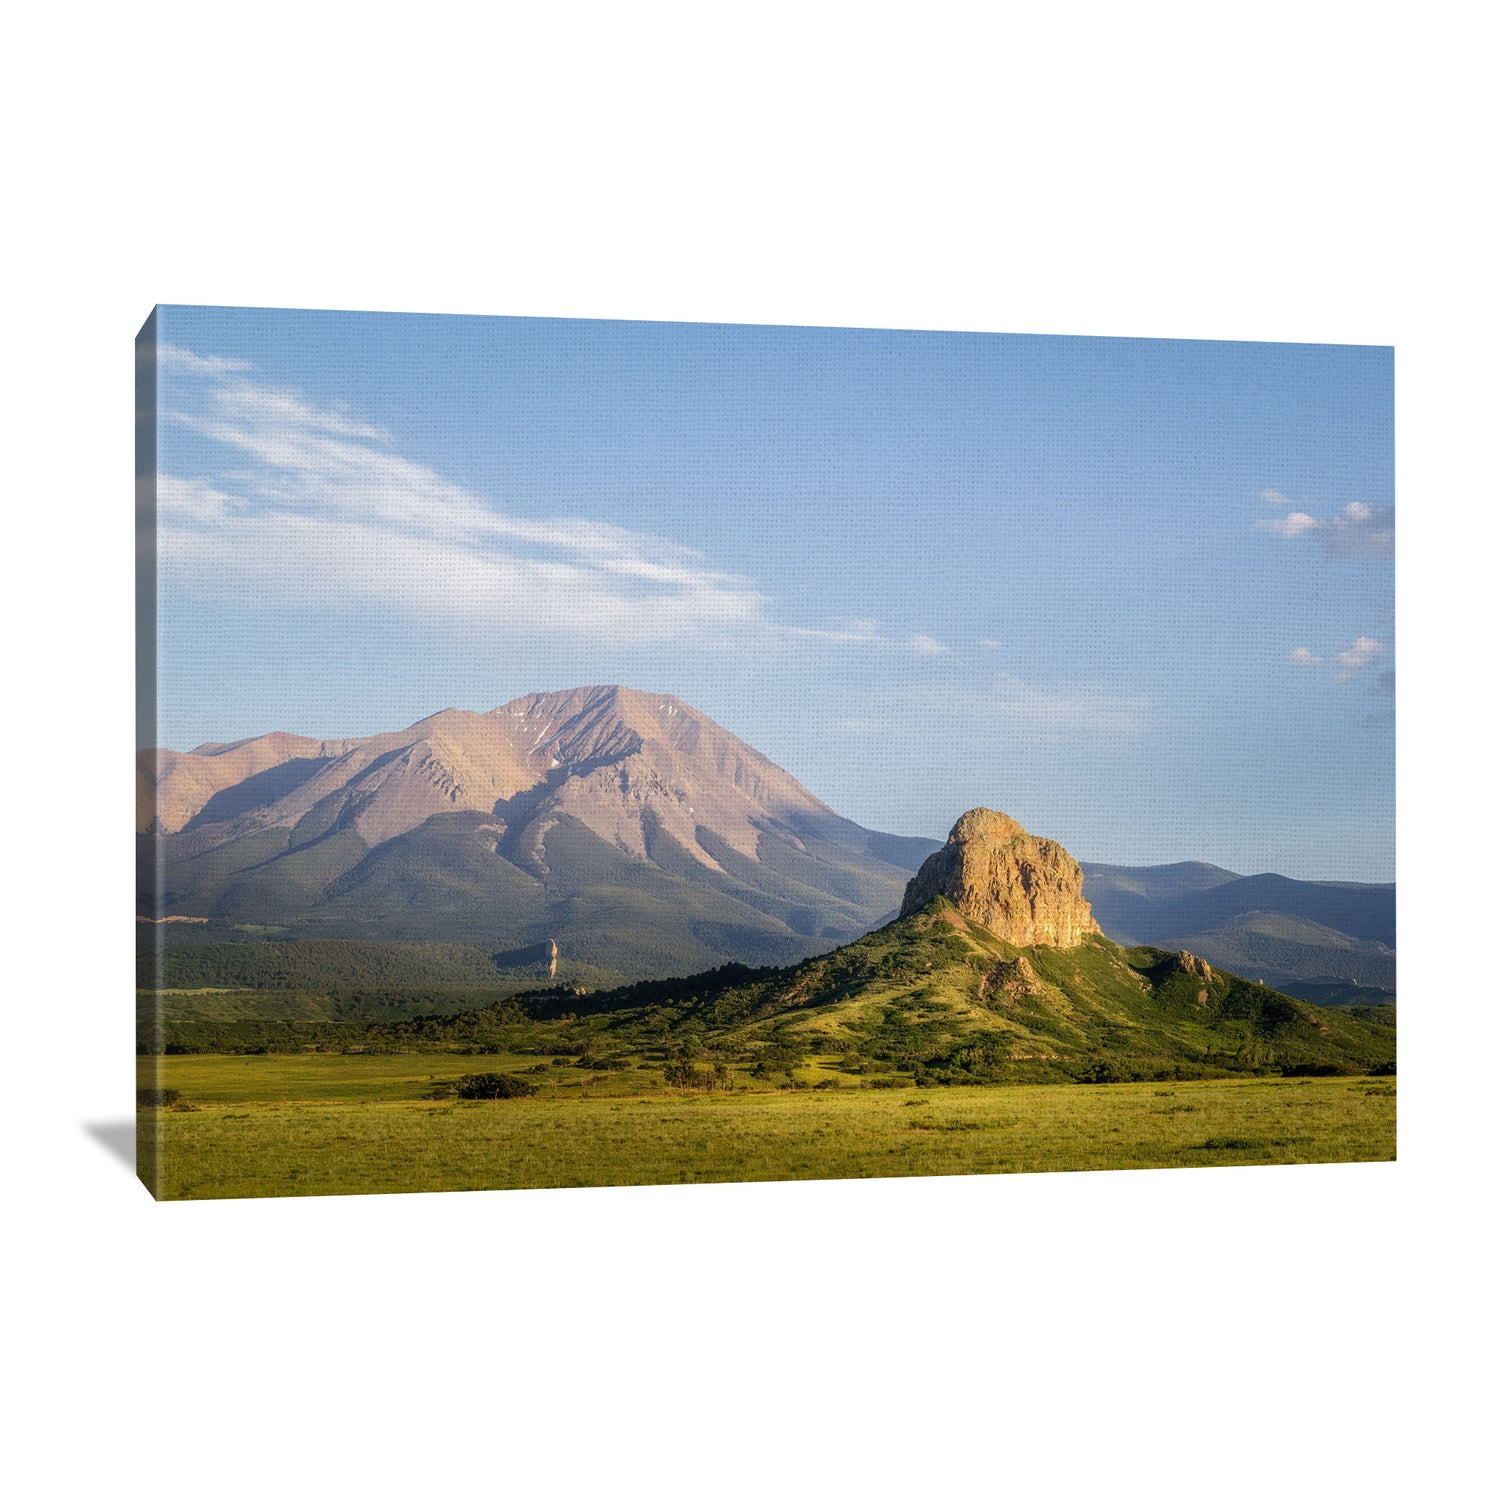 Nature photography canvas featuring the serene landscape of Goemmer Butte in Colorado, capturing the beauty of the region's natural scenery as wall art.